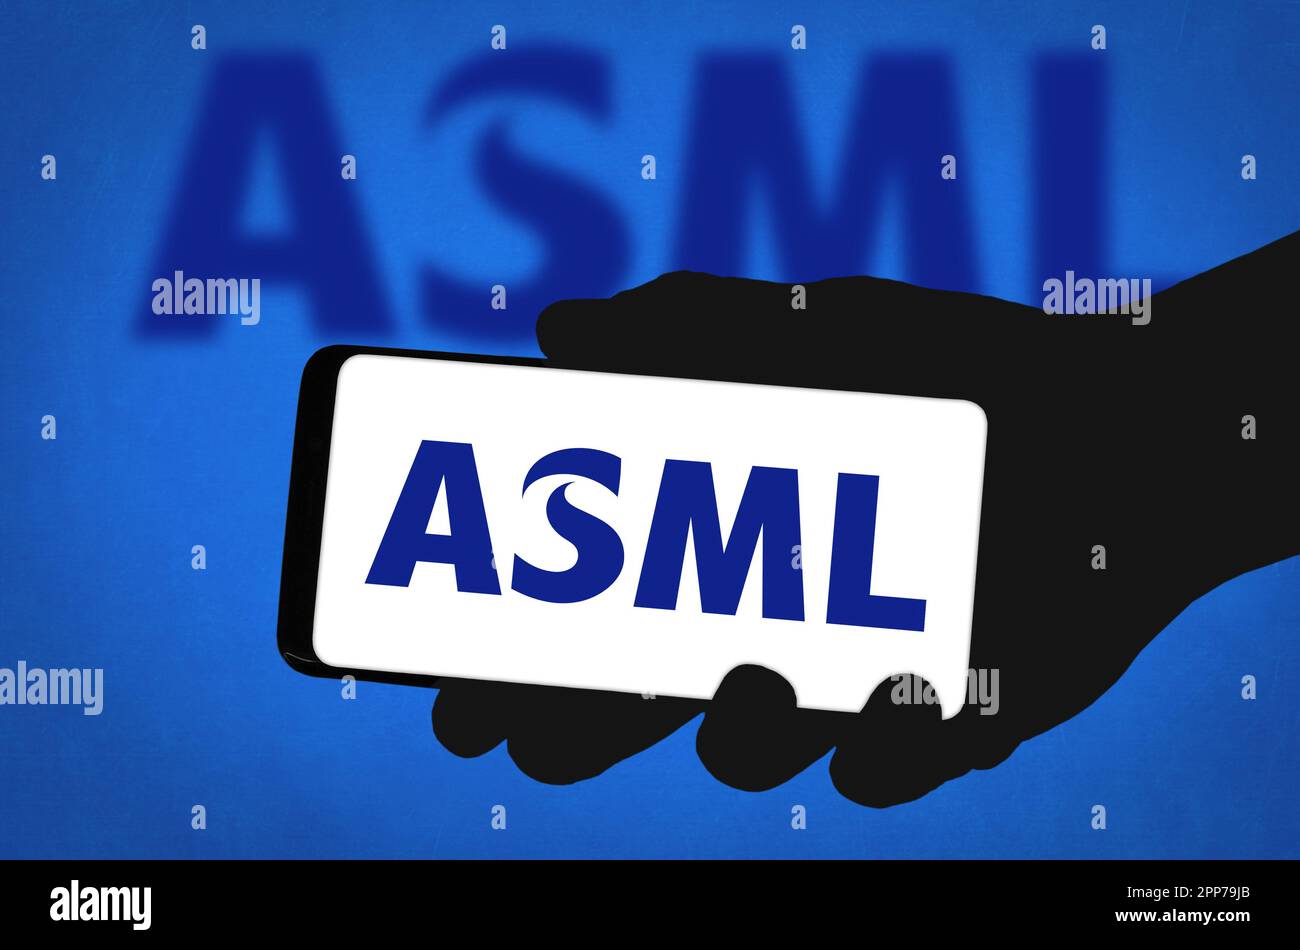 ASML Holding - Advanced Semiconductor Materials Lithography Stock Photo